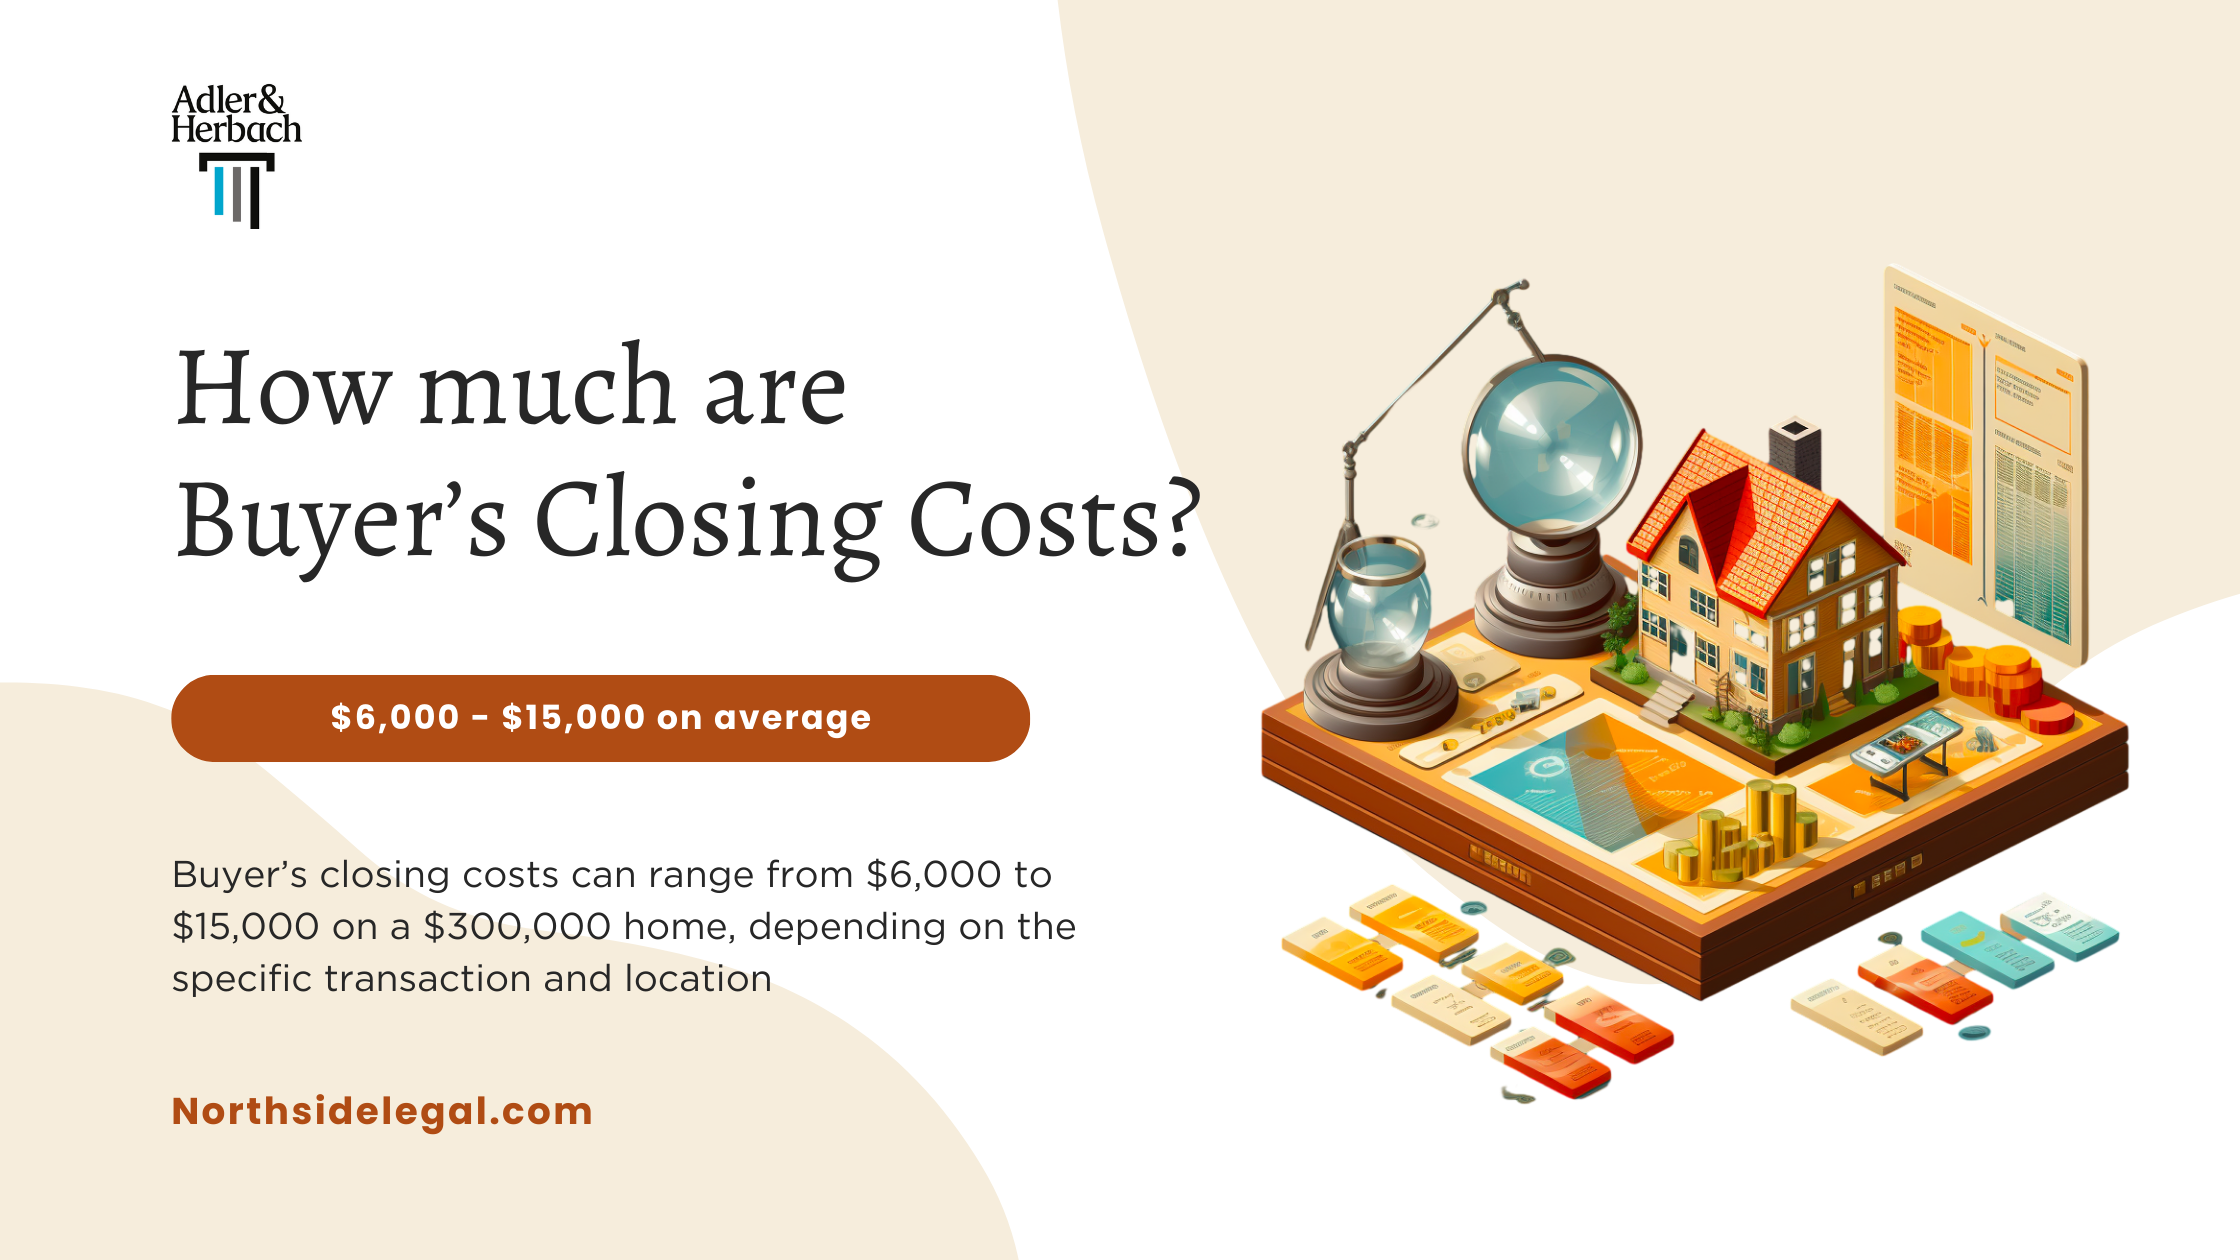 How Much Are Buyer’s Closing Costs?